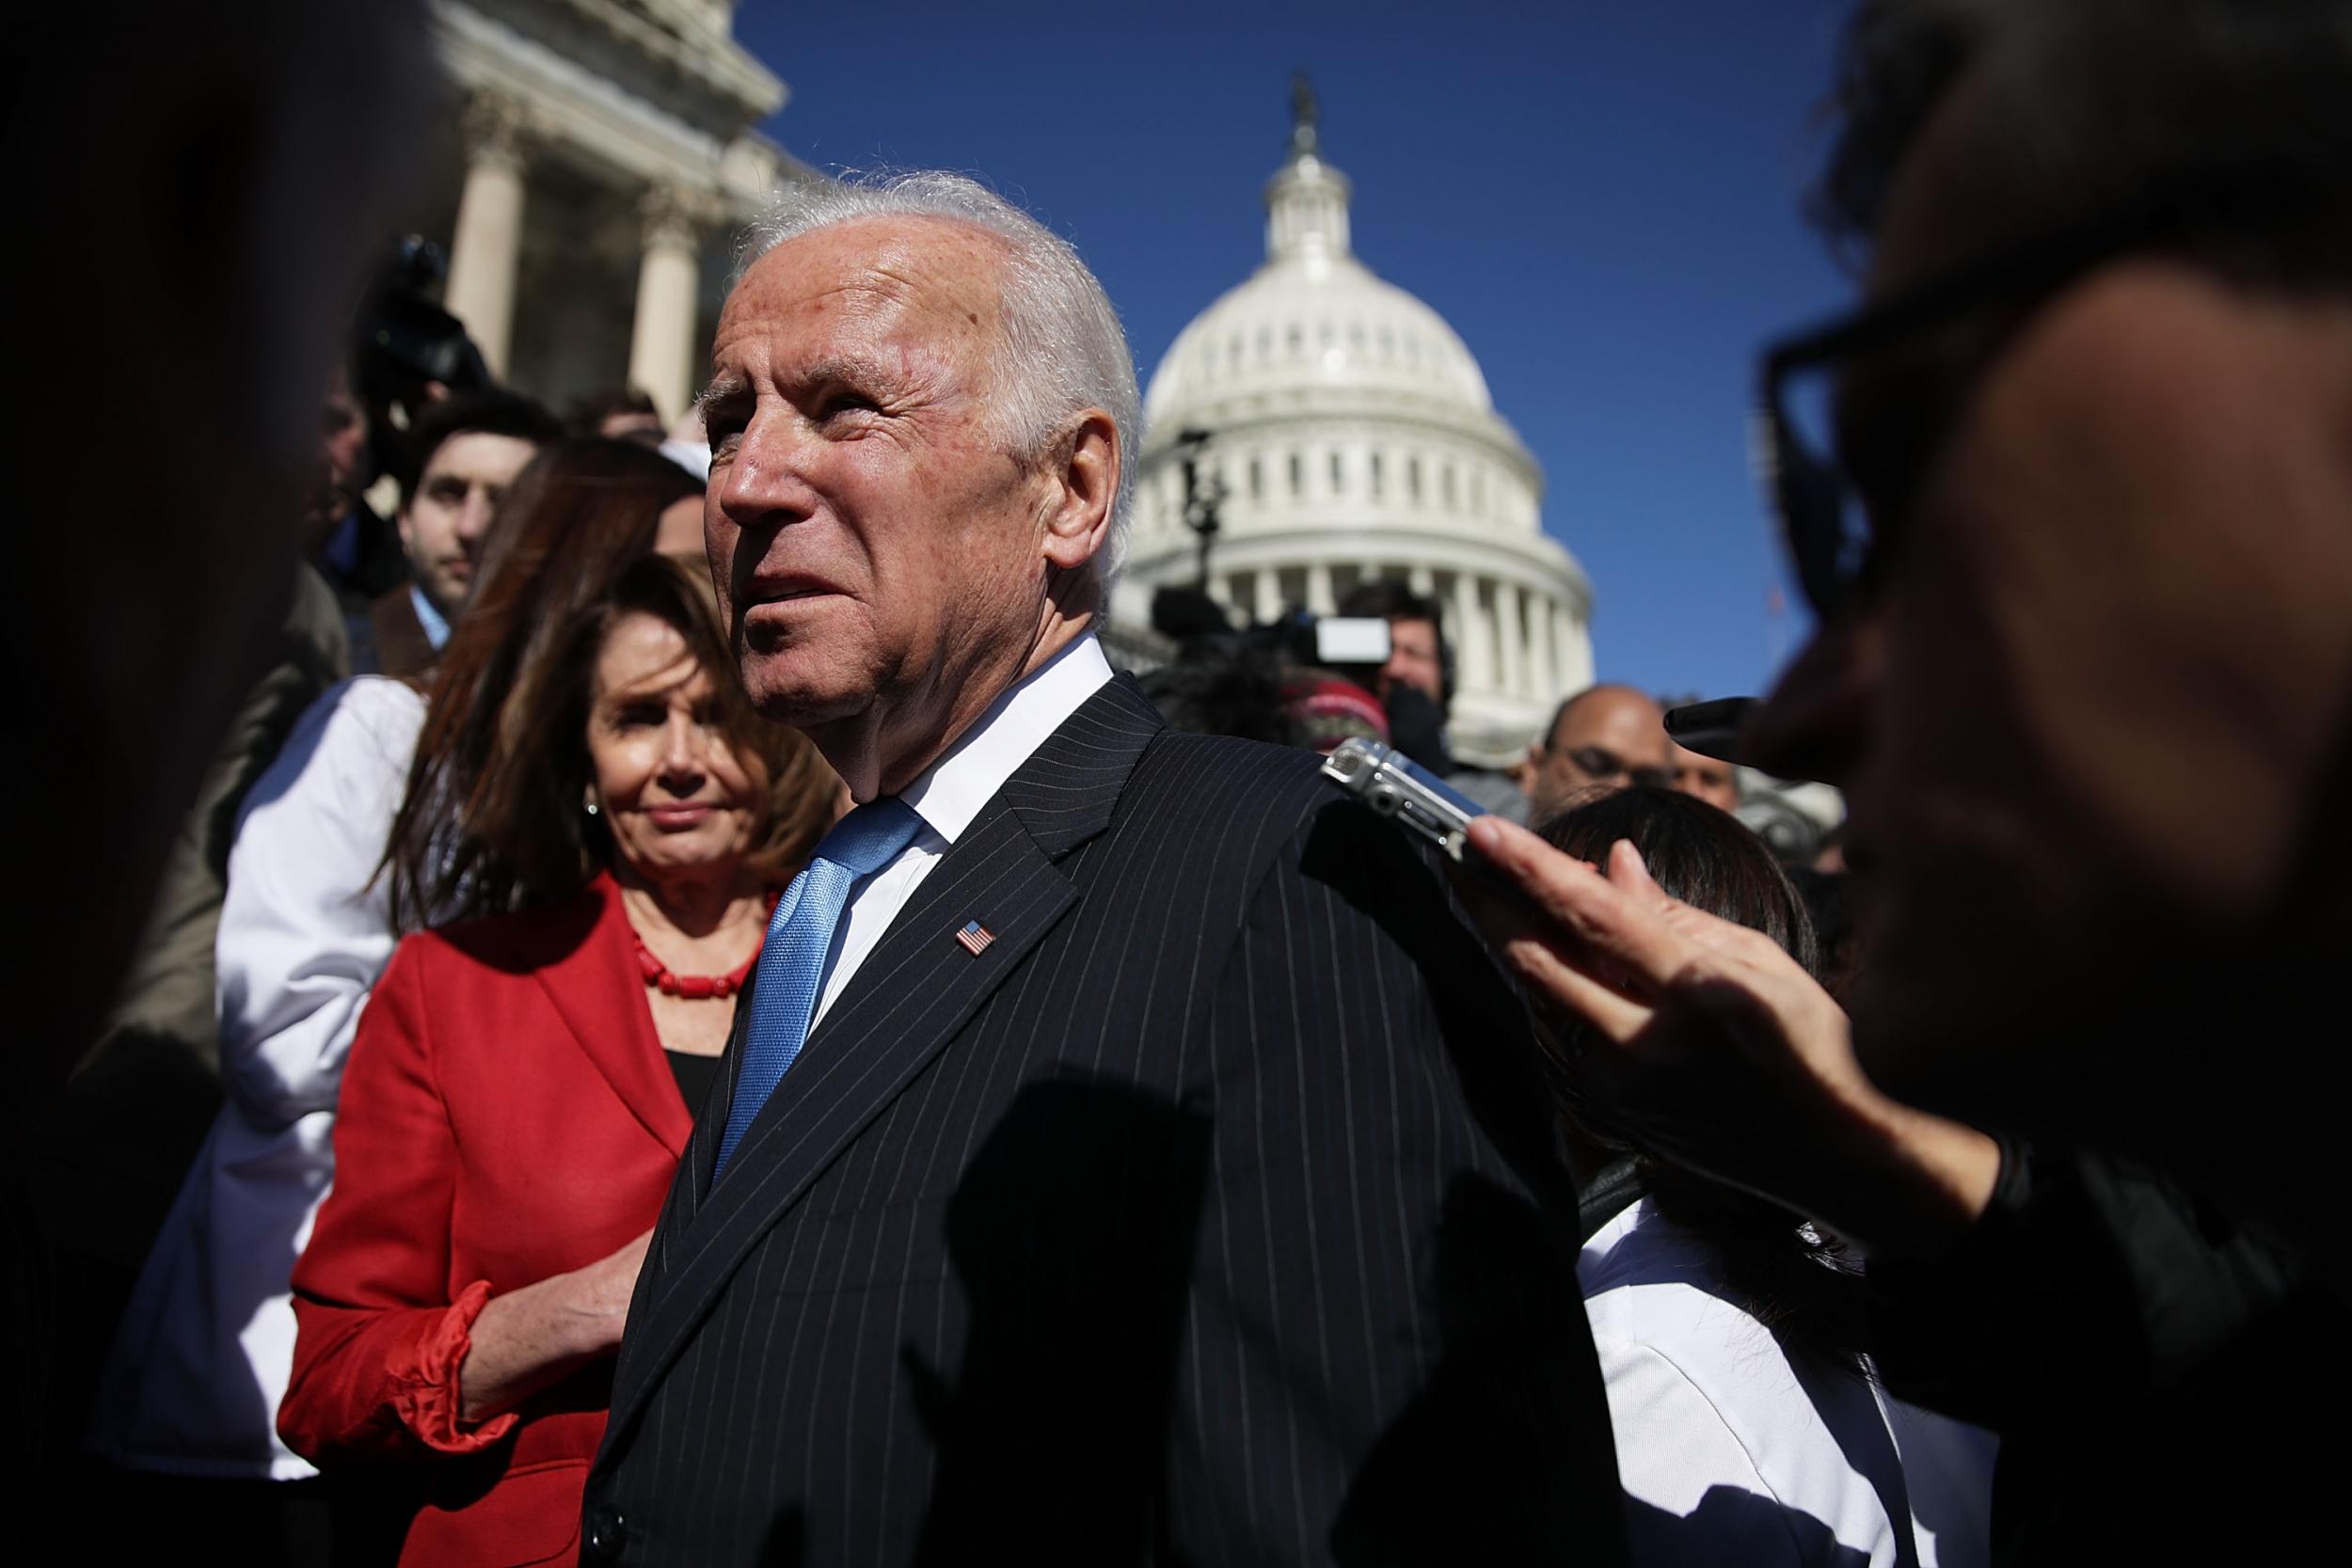 Biden would beat Trump in a hypothetical 2020 matchup, a new poll shows